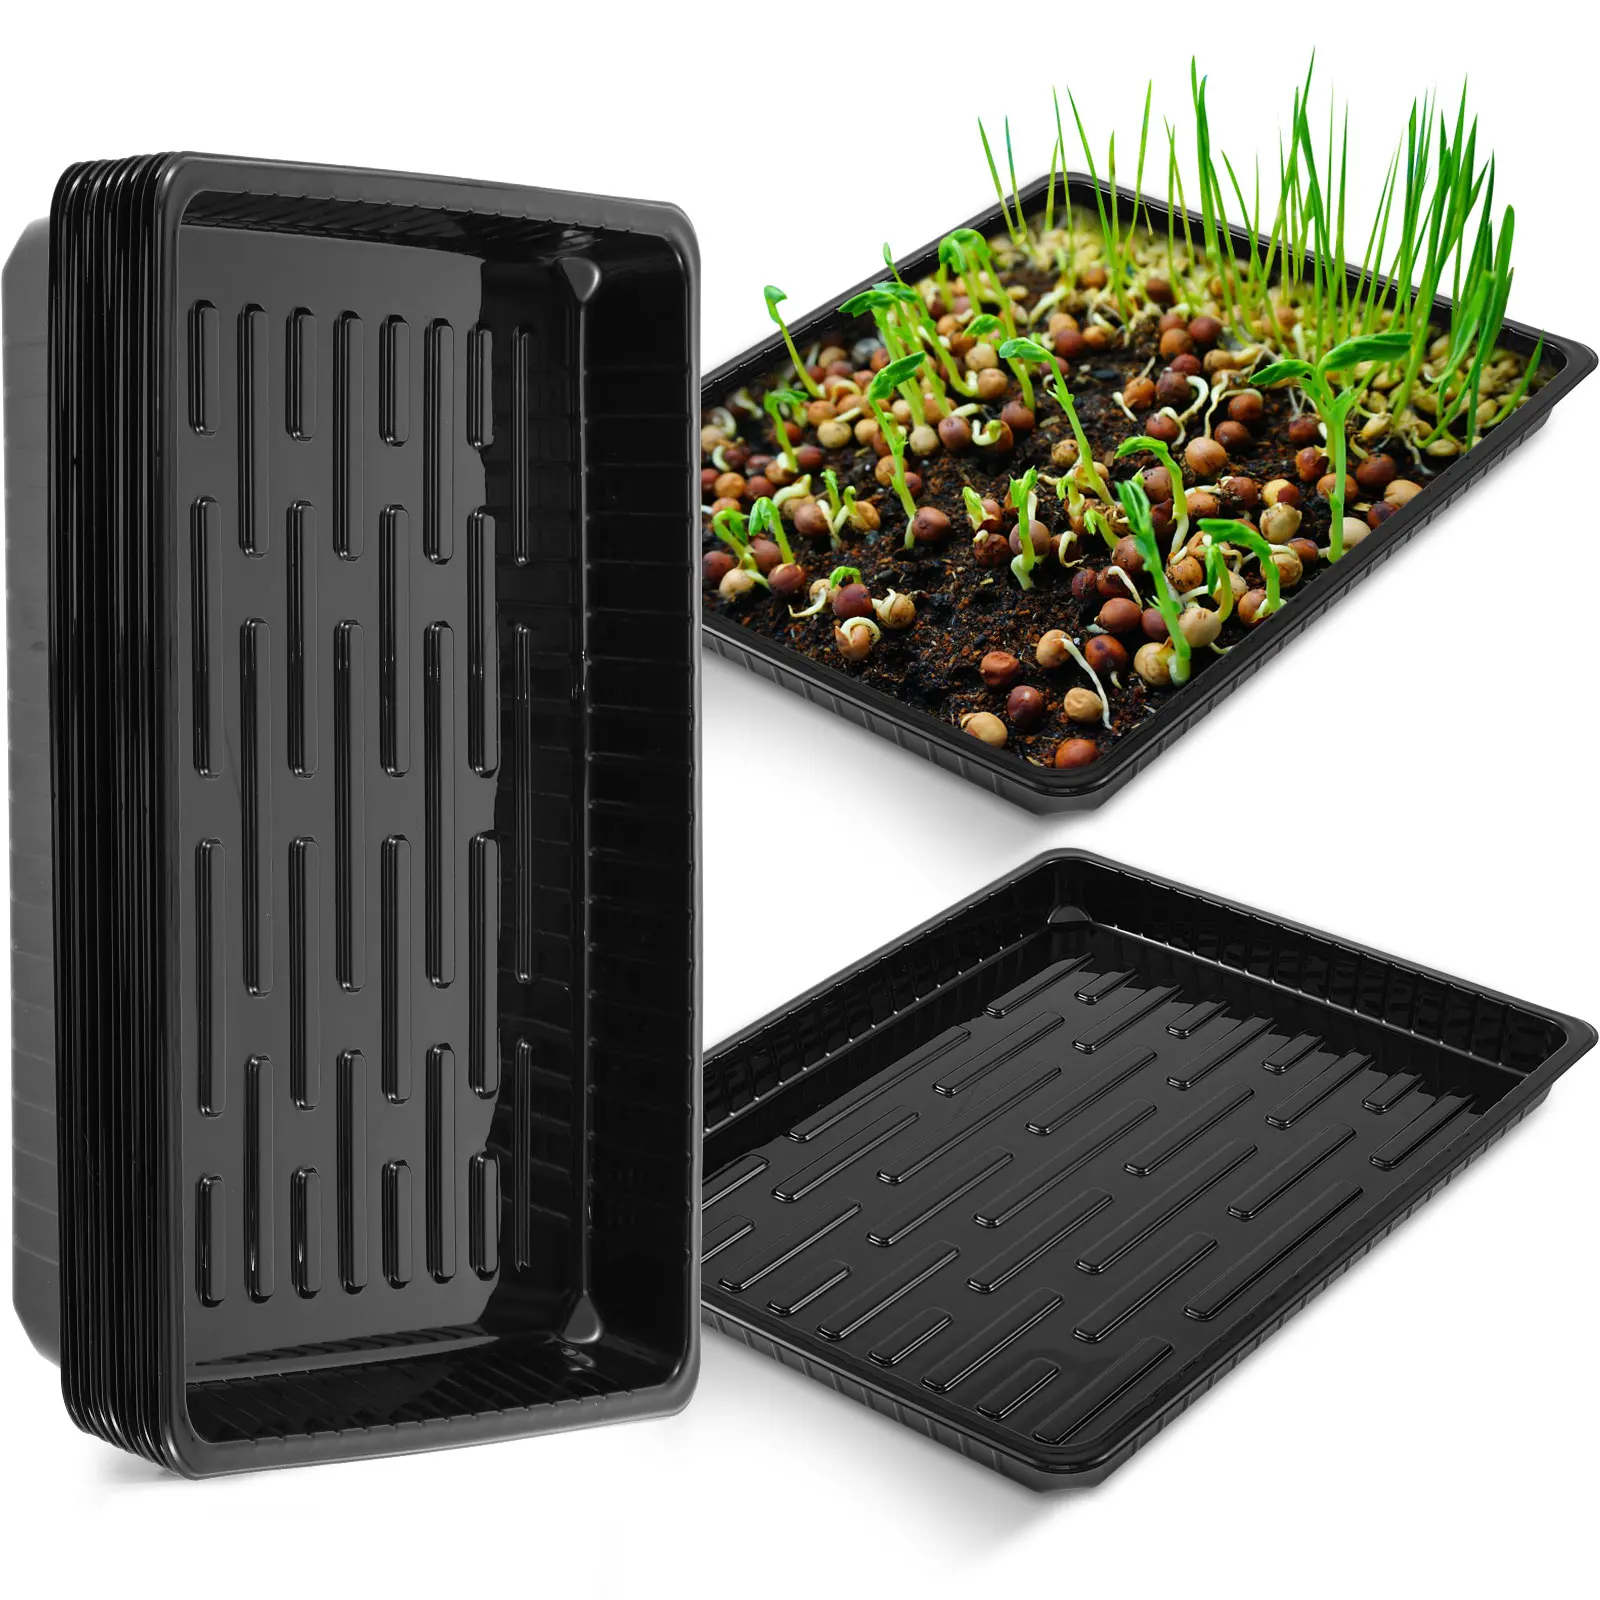 

10Pcs Plastic Growing Trays No Holes Seed Propagation Tray Durable Nursery Seedling Trays Reusable Seed Germination Trays